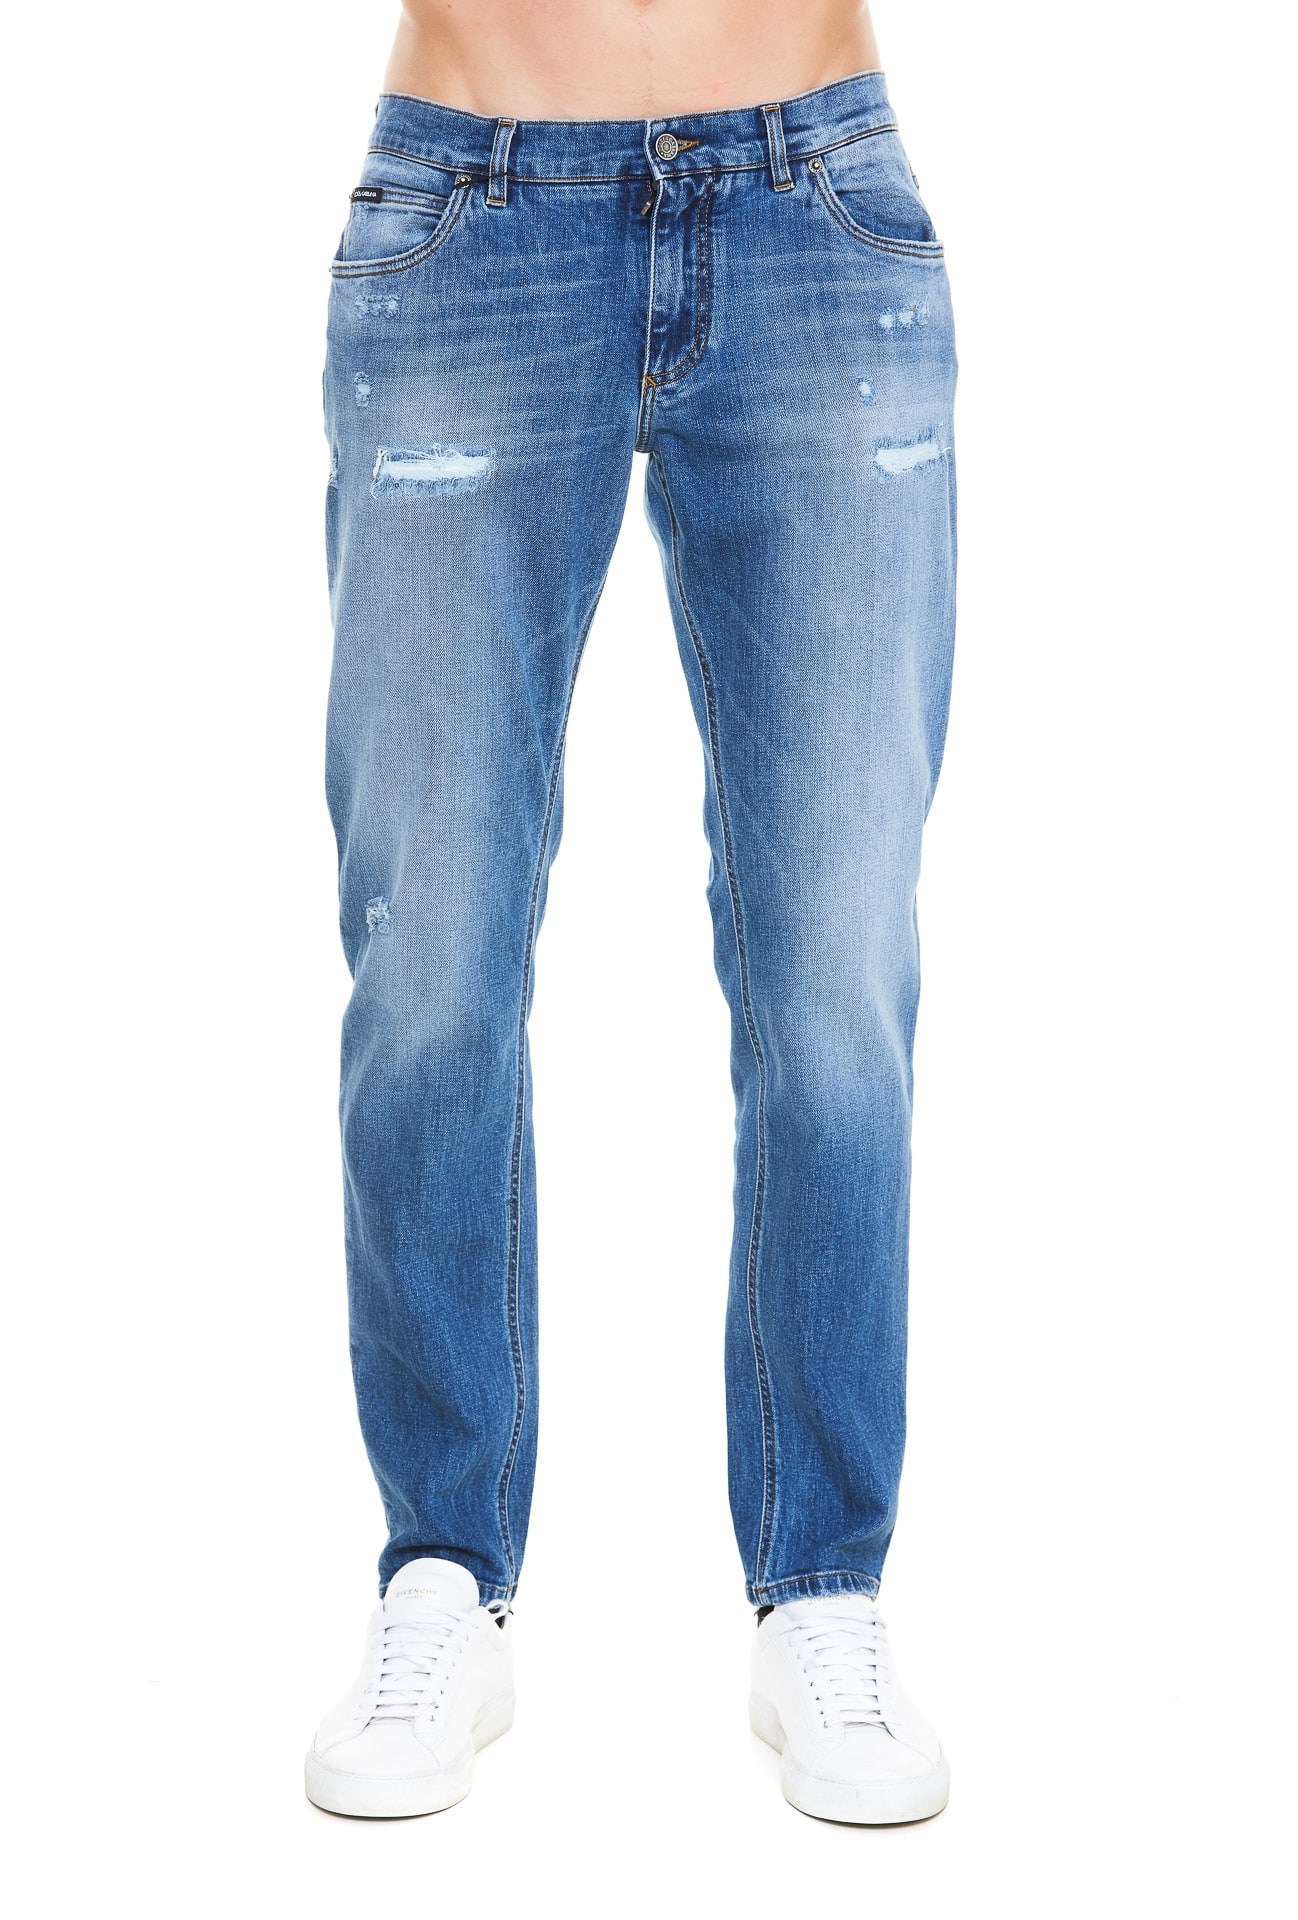 Dolce & Gabbana Denim Jeans With Small Rips